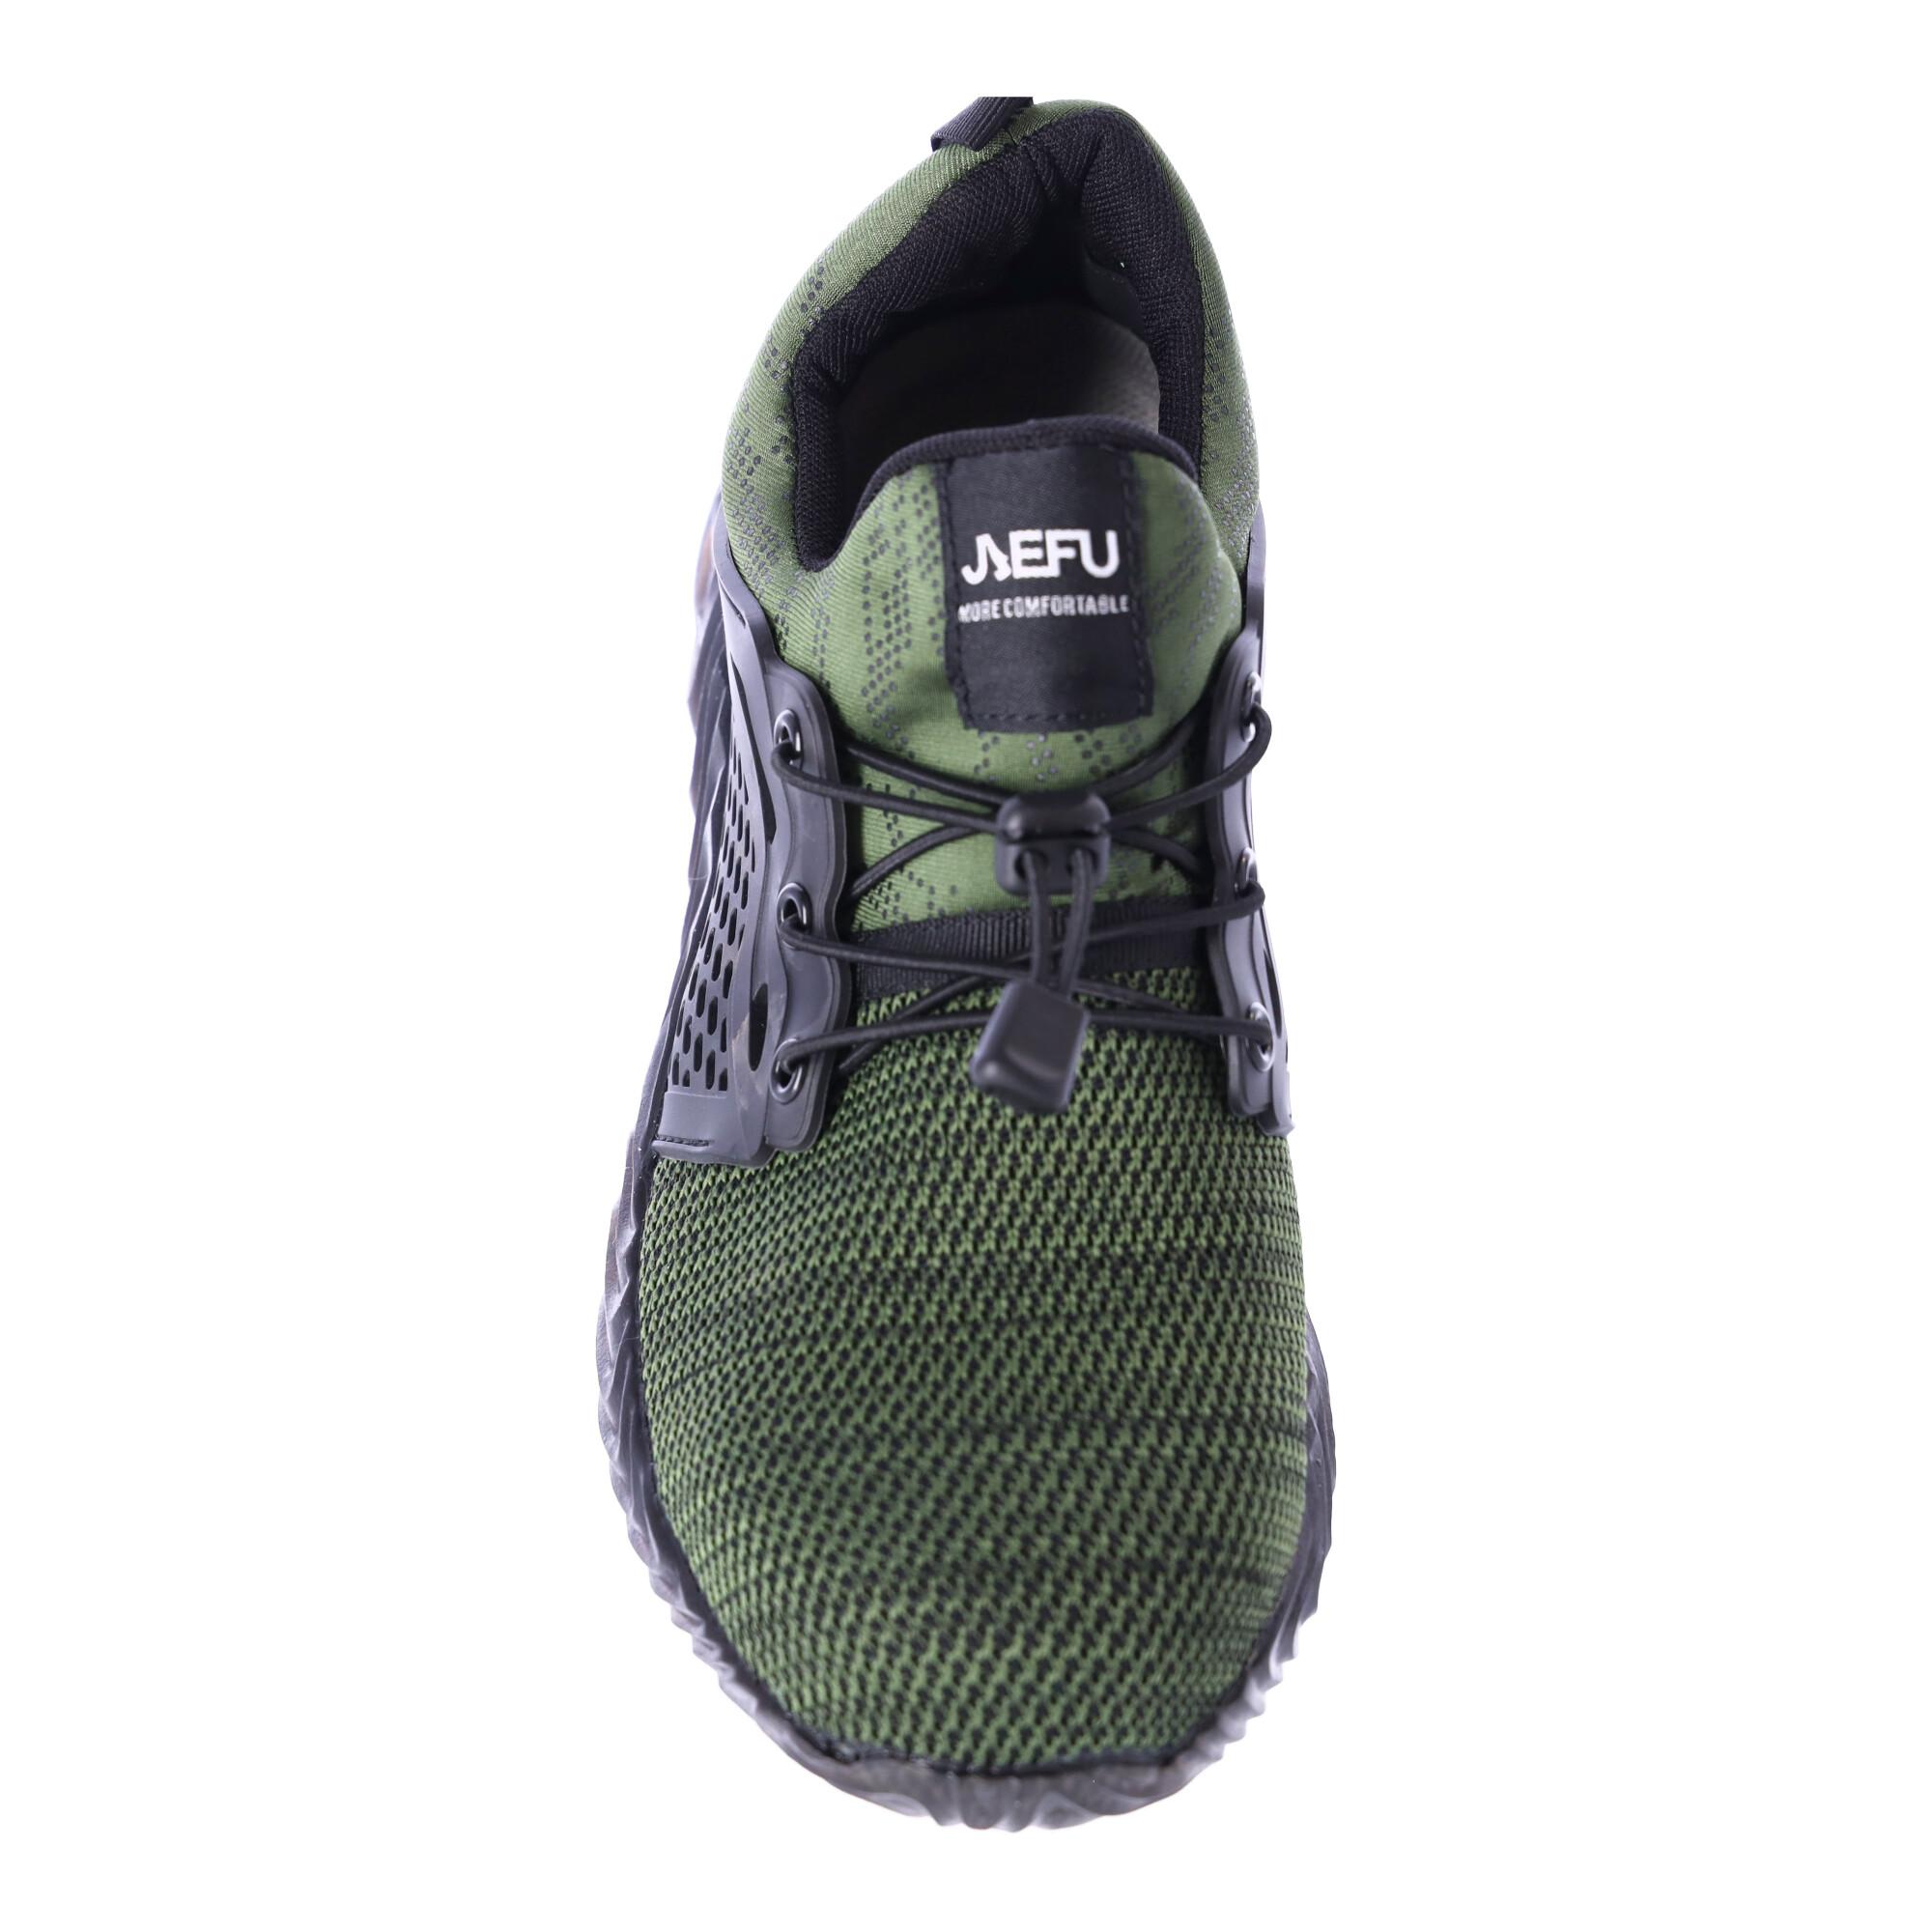 Work safety shoes "45" - green